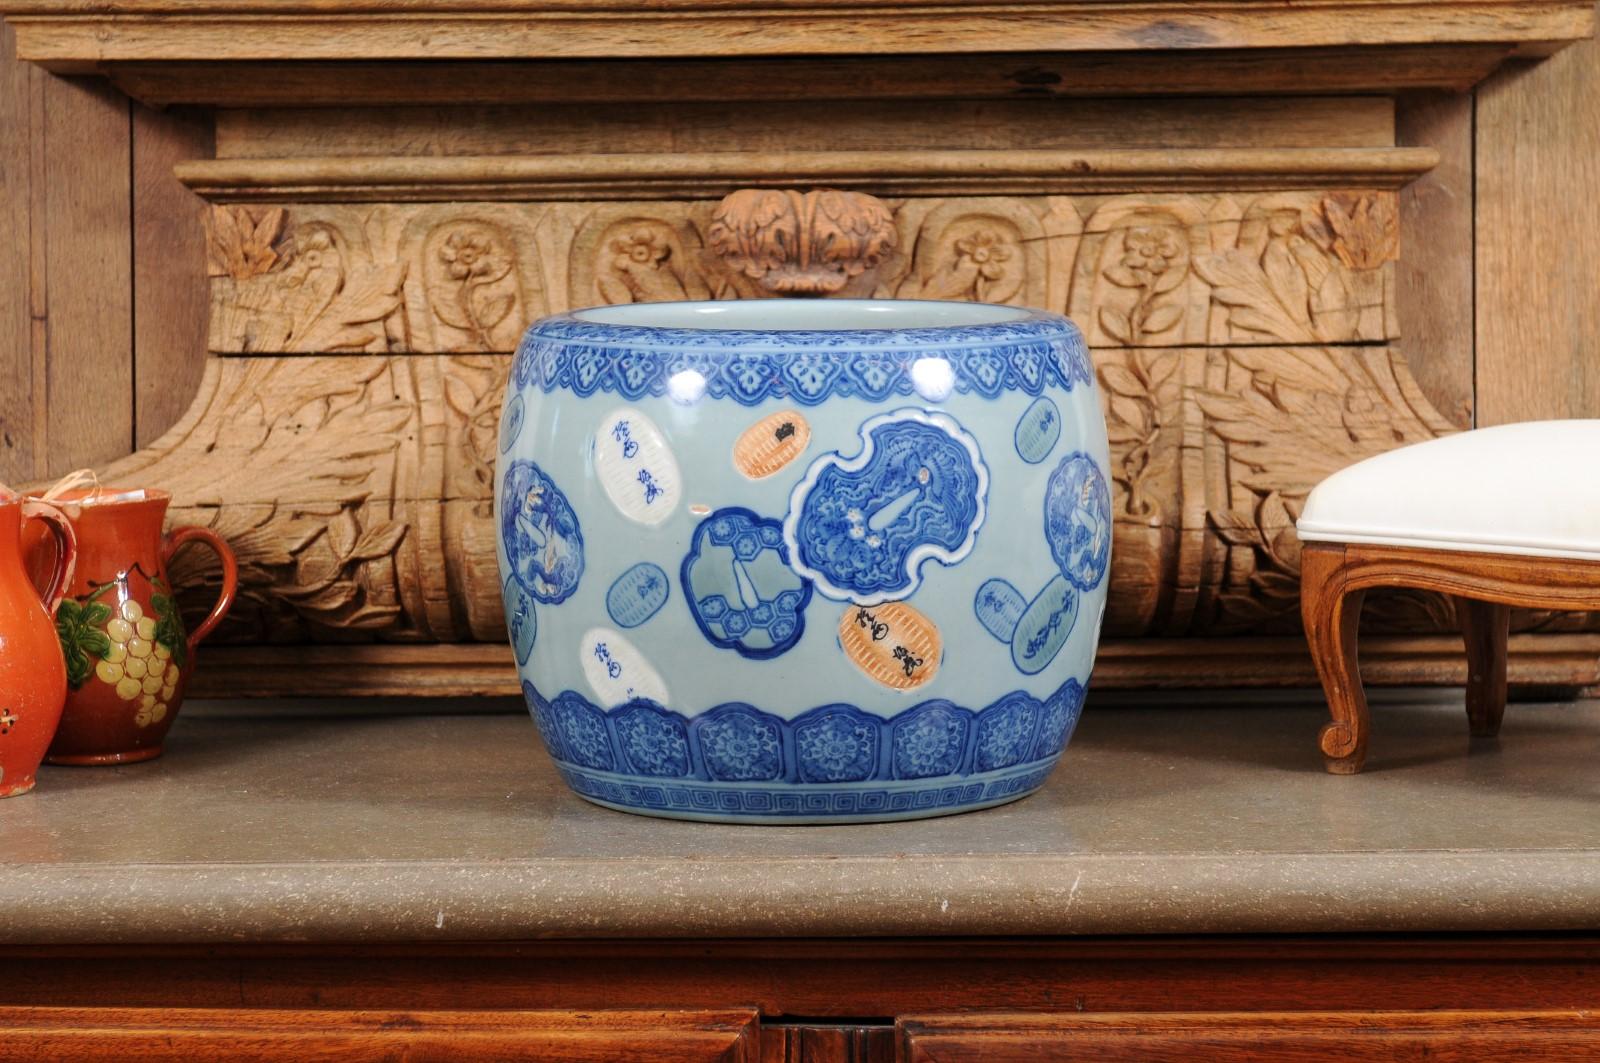 An Asian porcelain cachepot from the late 19th century, with floating cartouches and blue, white and orange tones. Created in Asia during the later years of the 19th century, this small cachepot charms us with its simple circular lines adorned with